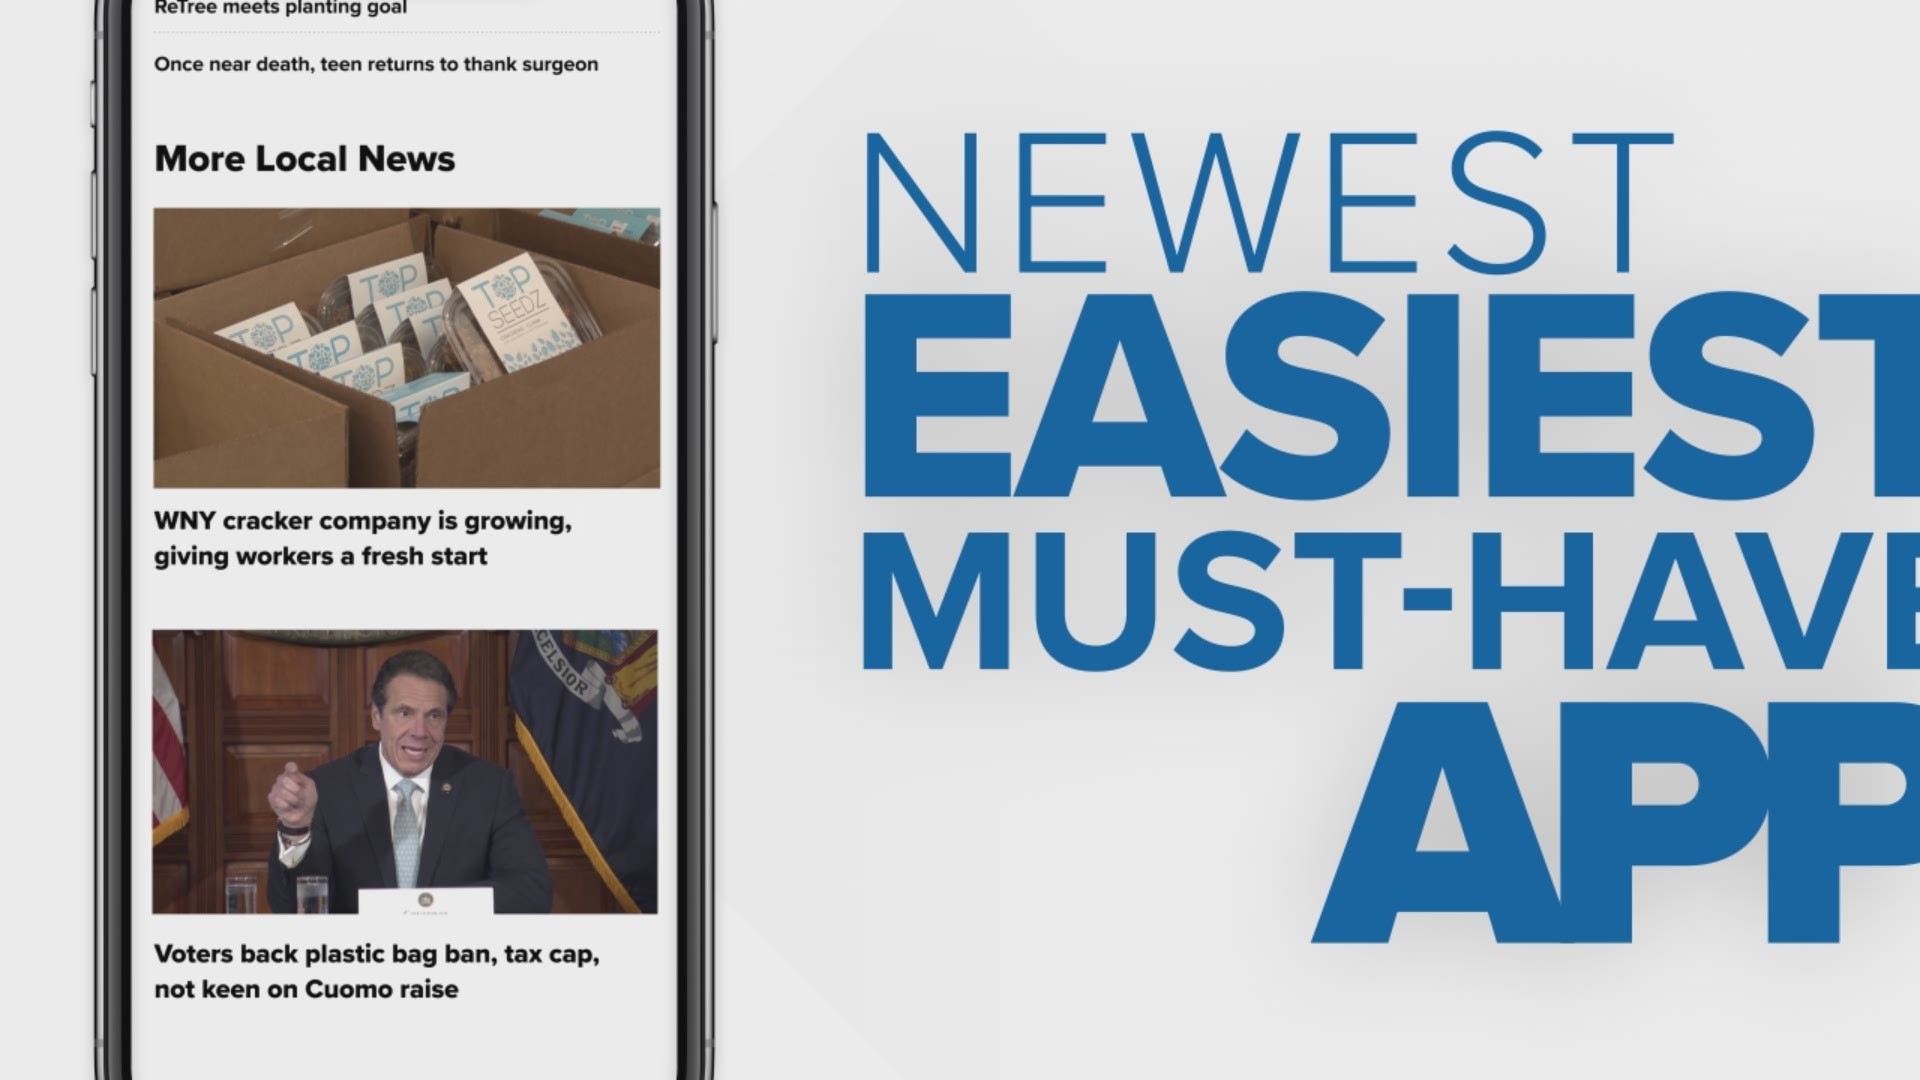 We’re excited to share with you that we've launched an all-new and improved mobile app designed for our most important audience: You.   On our new app, it’s easy to follow your favorite topics, check the local forecast and watch live video.